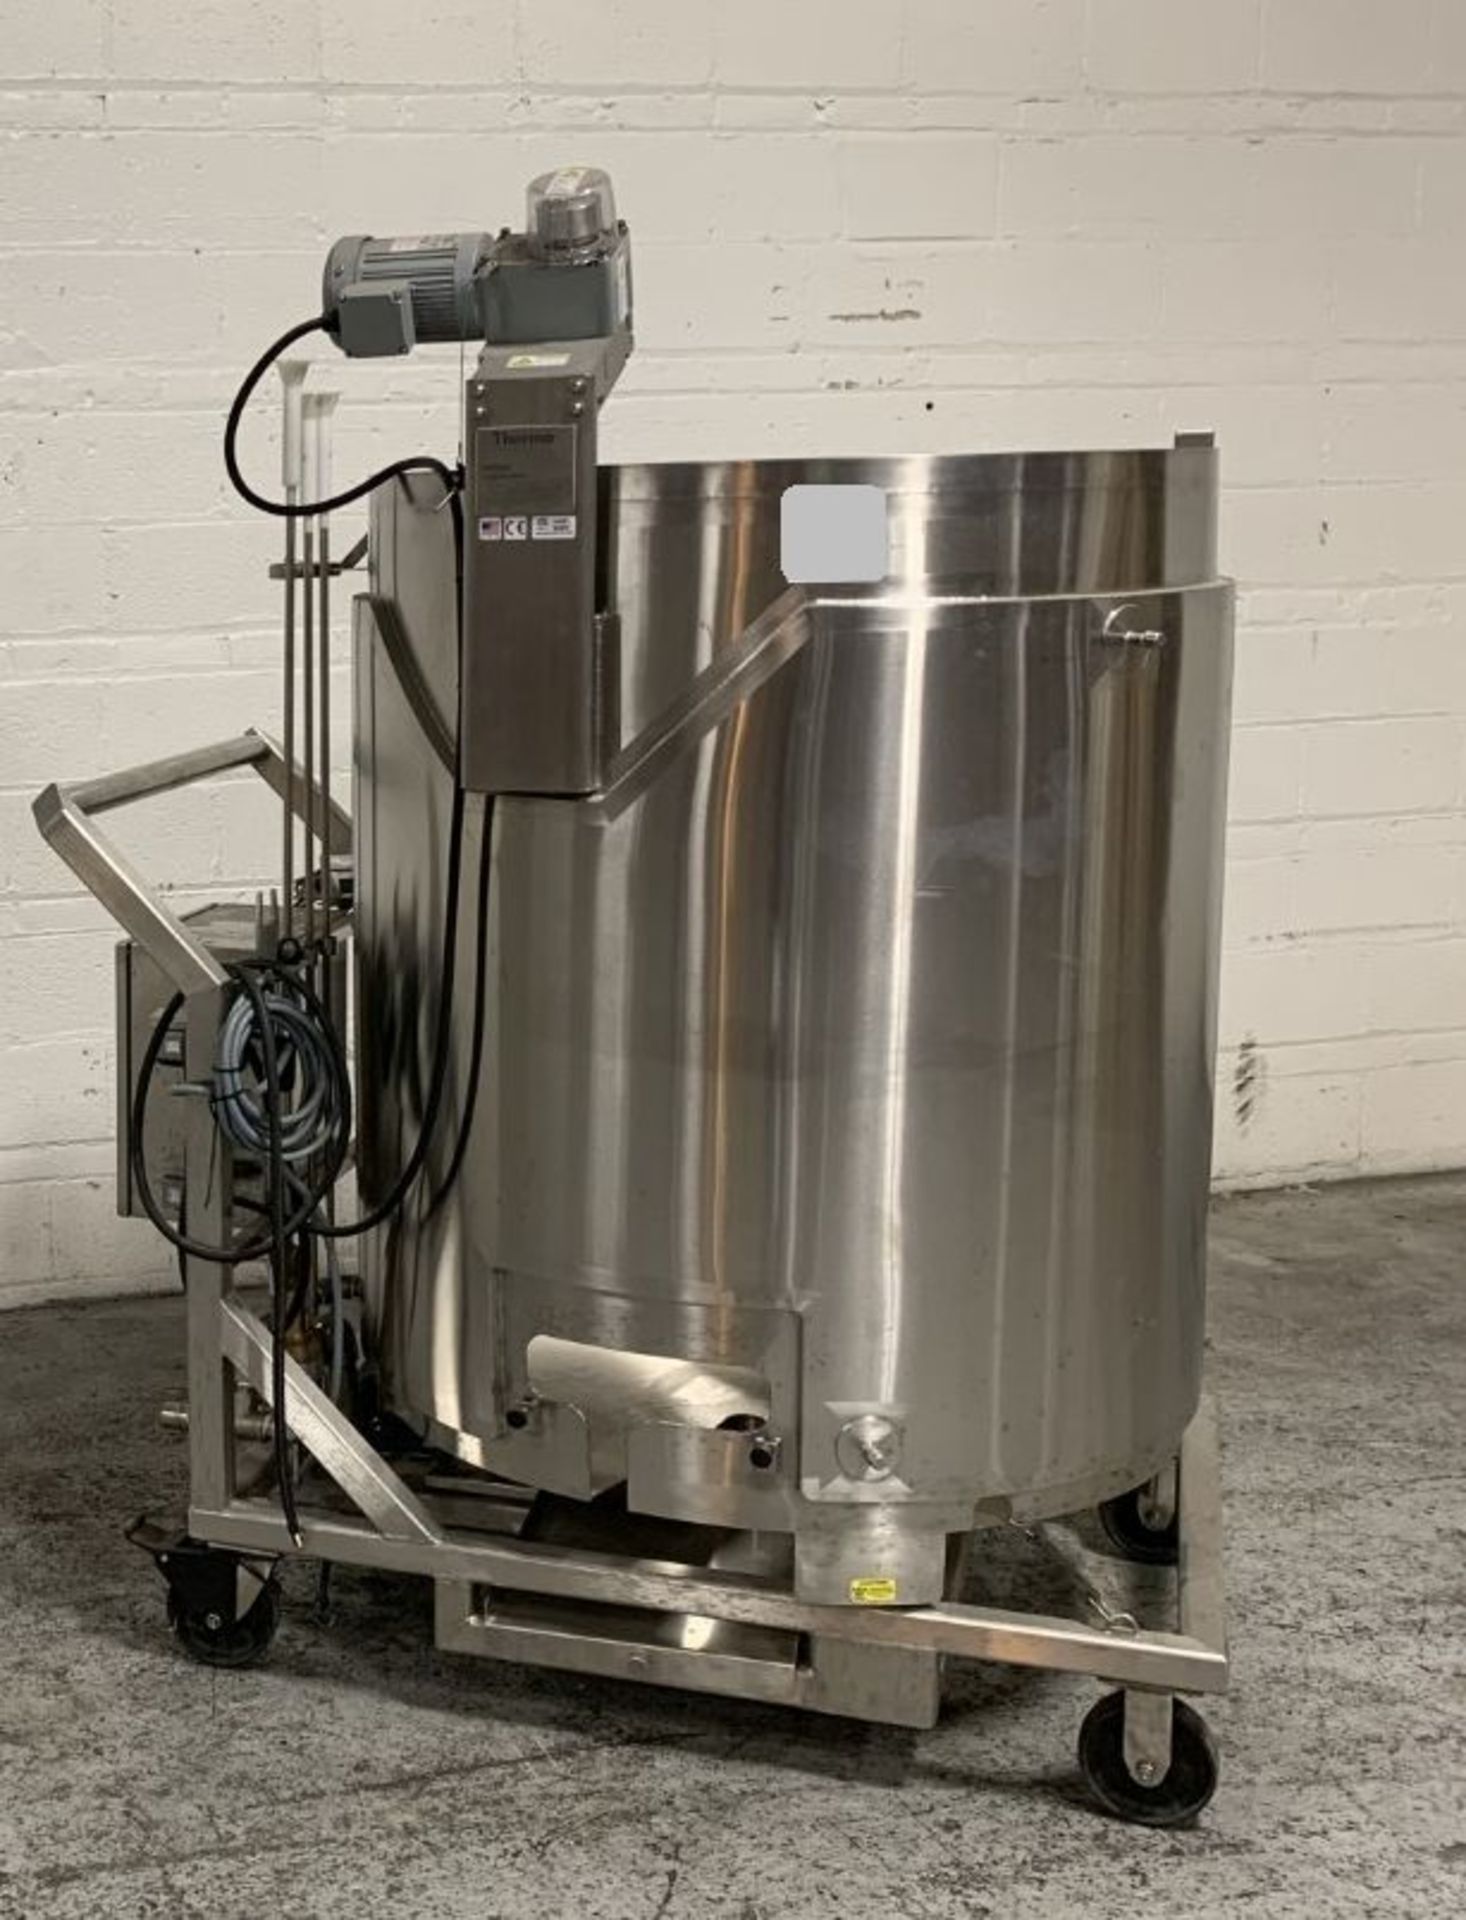 Thermo Scientific HyClone single use mixer, stainless steel construction, 1000 liter capacity